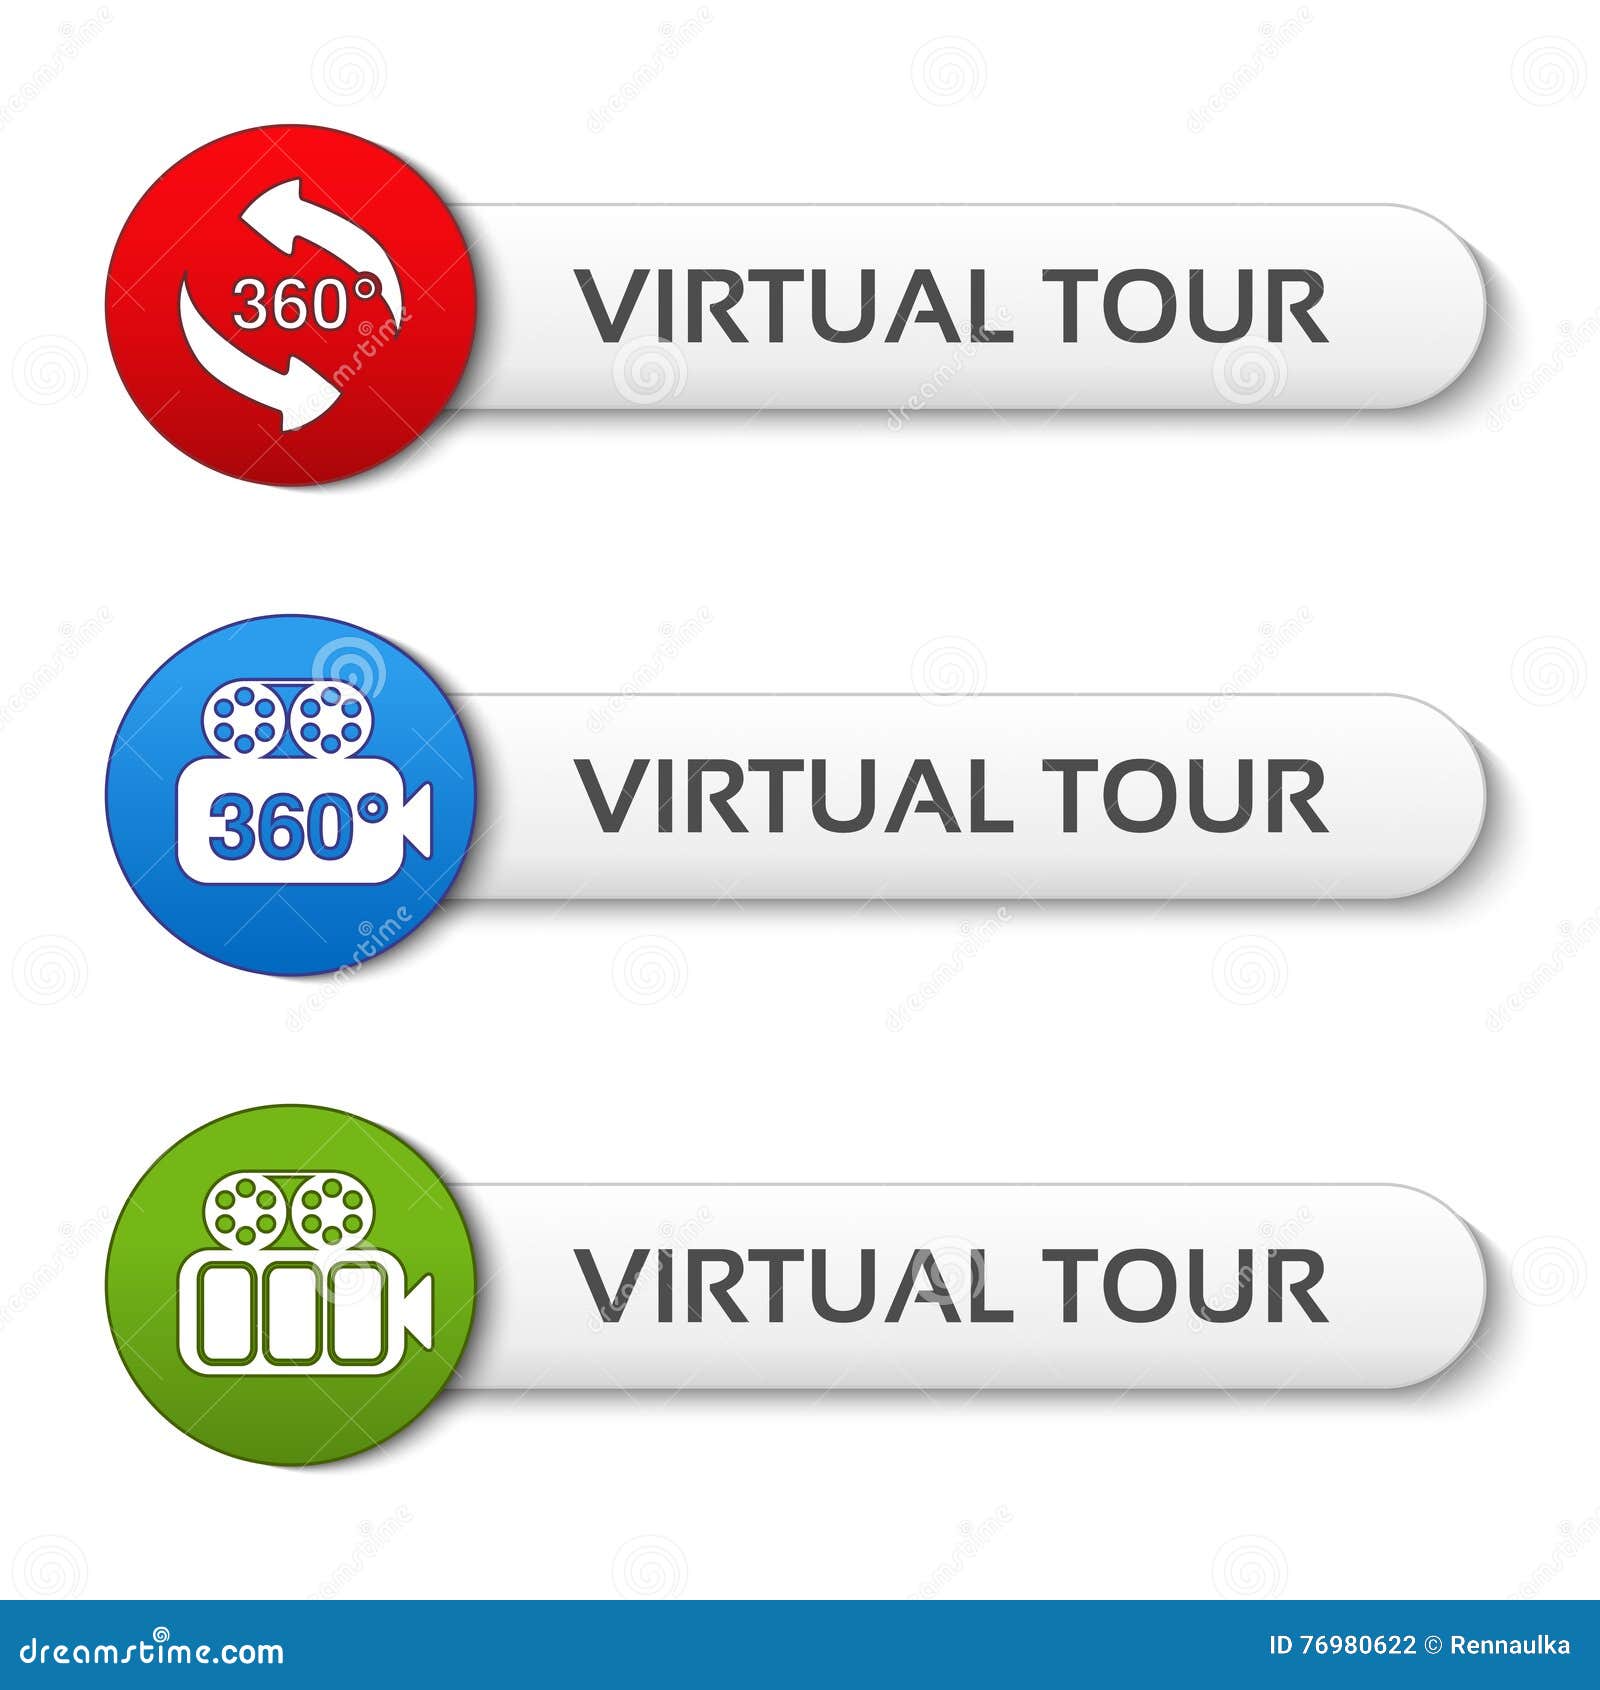 buttons for virtual tour, red, green and blue labels - stickers with arrows and camera